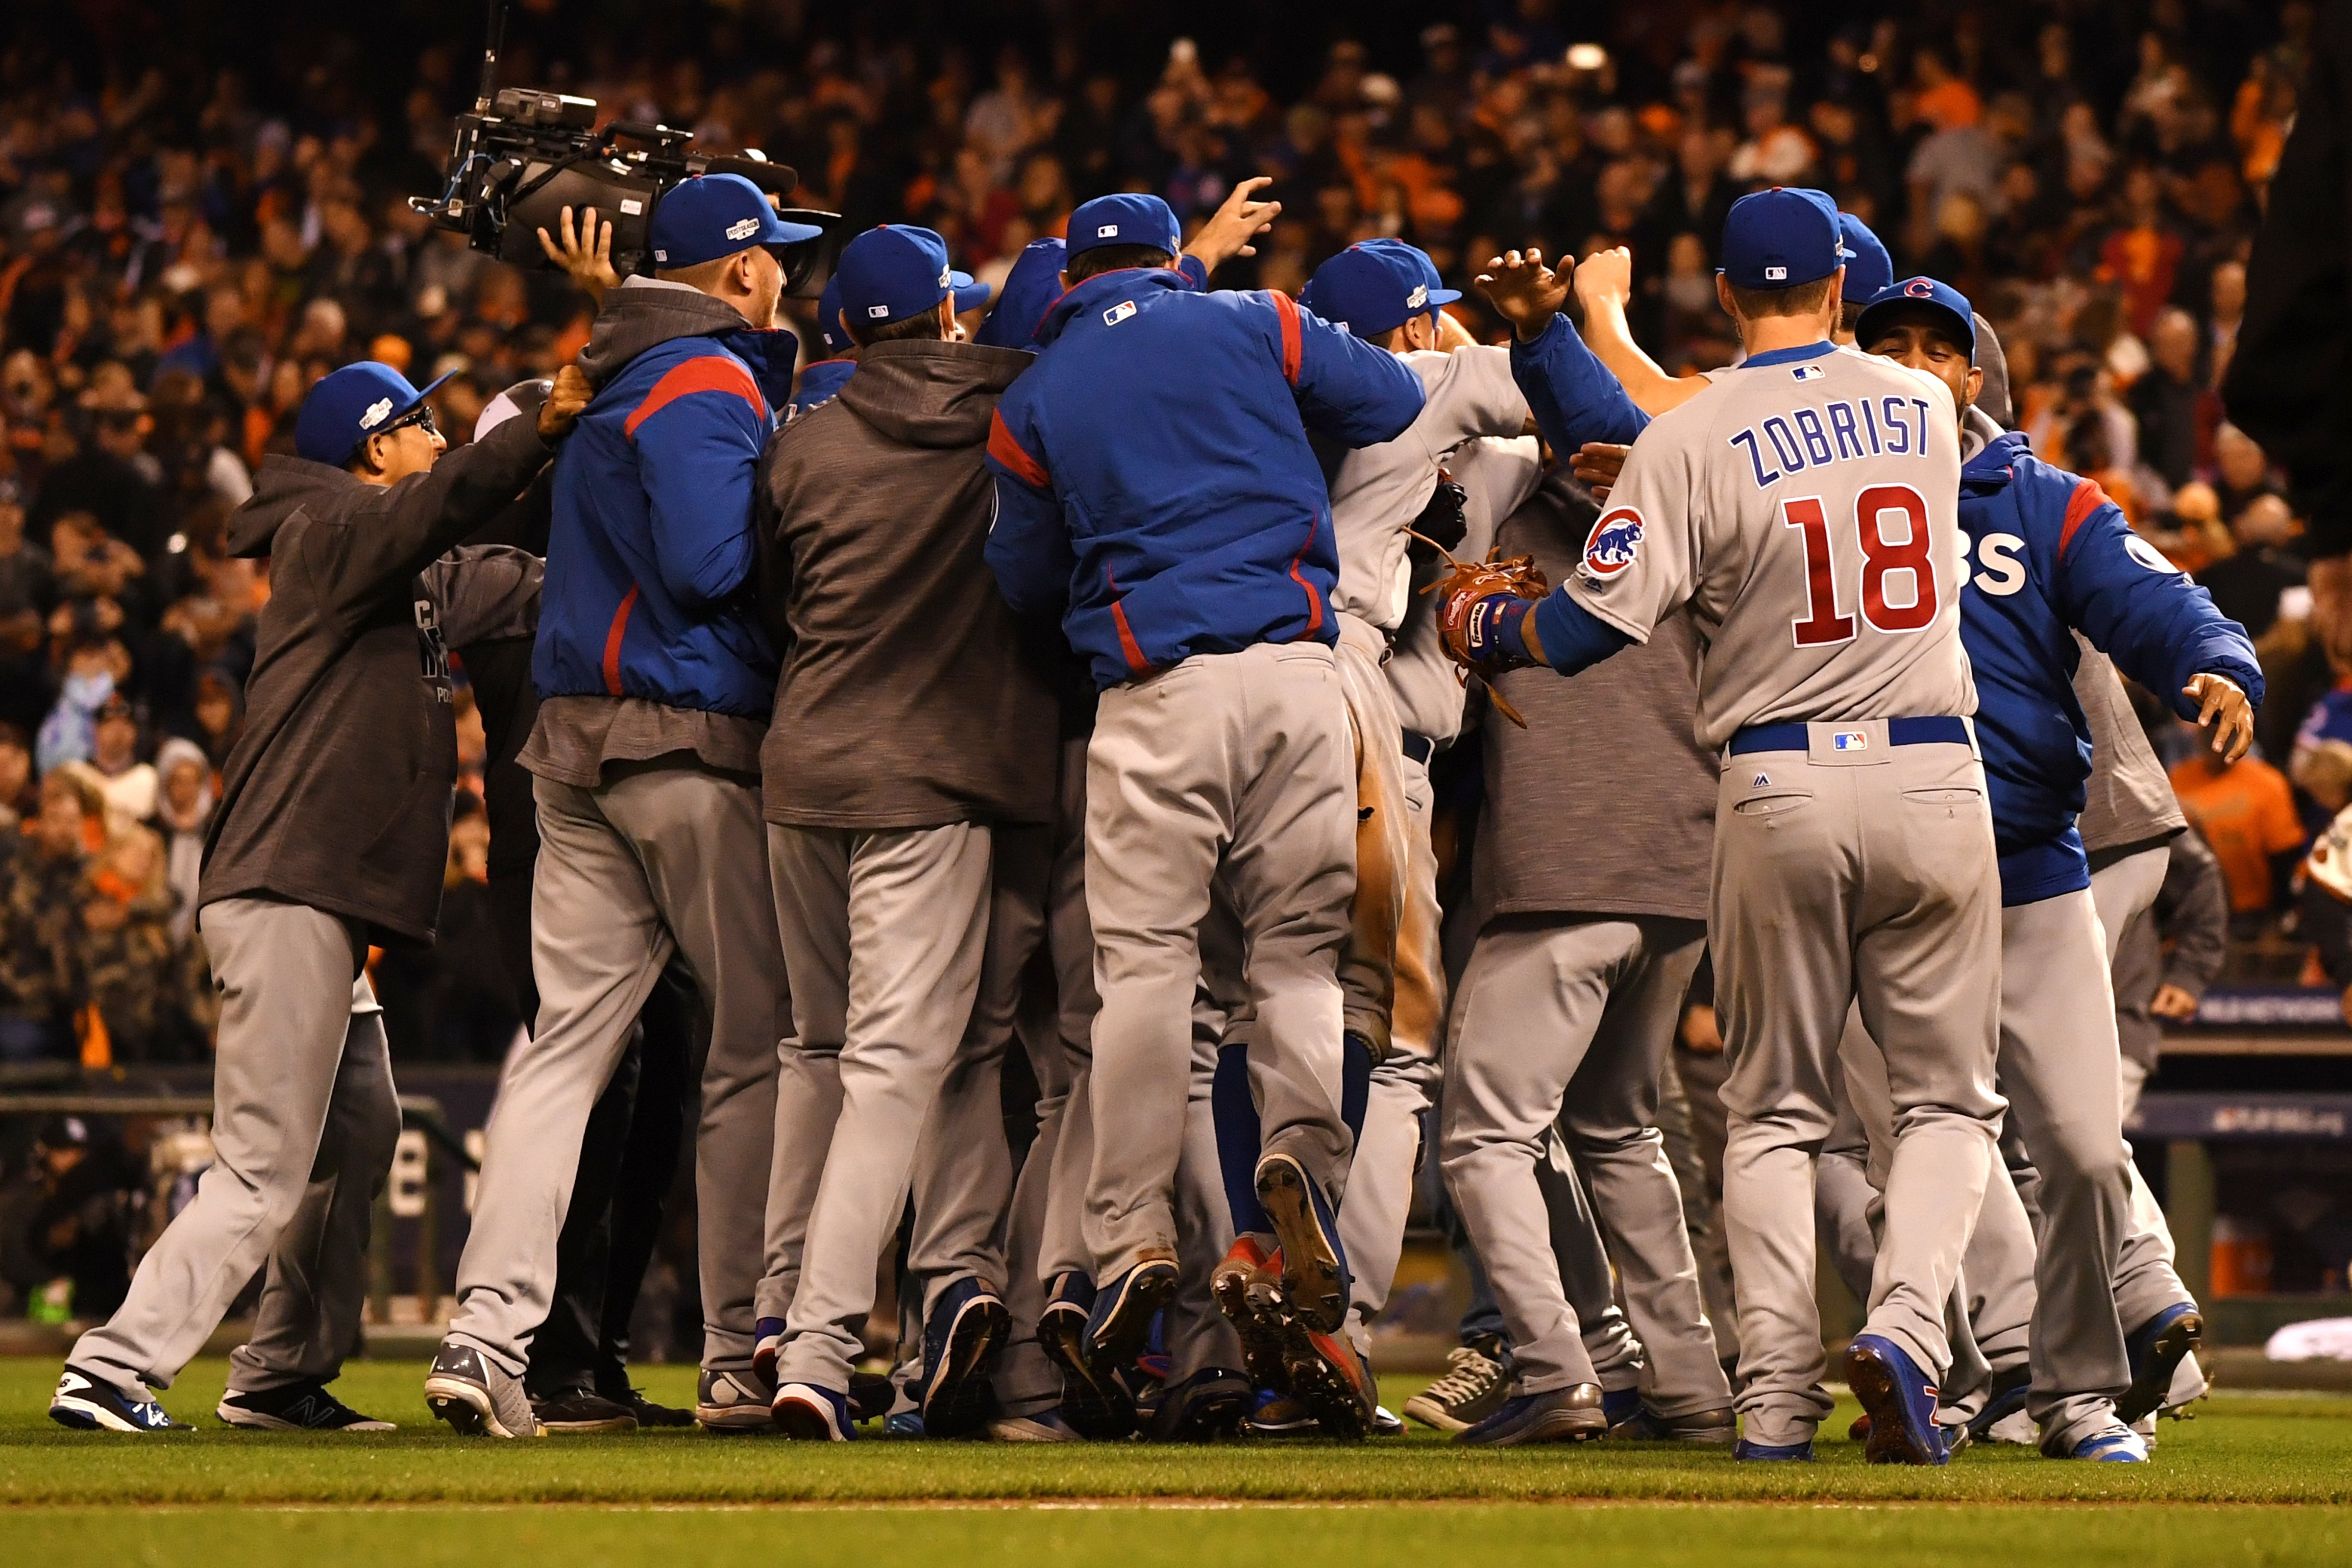 The Chicago Cubs celebrate after defeating the San Francisco Giants 6-5 in Game Four of their National League Division Series to advance to the National League Championship Series. (Thearon W. Henderson&mdash;Getty Images)